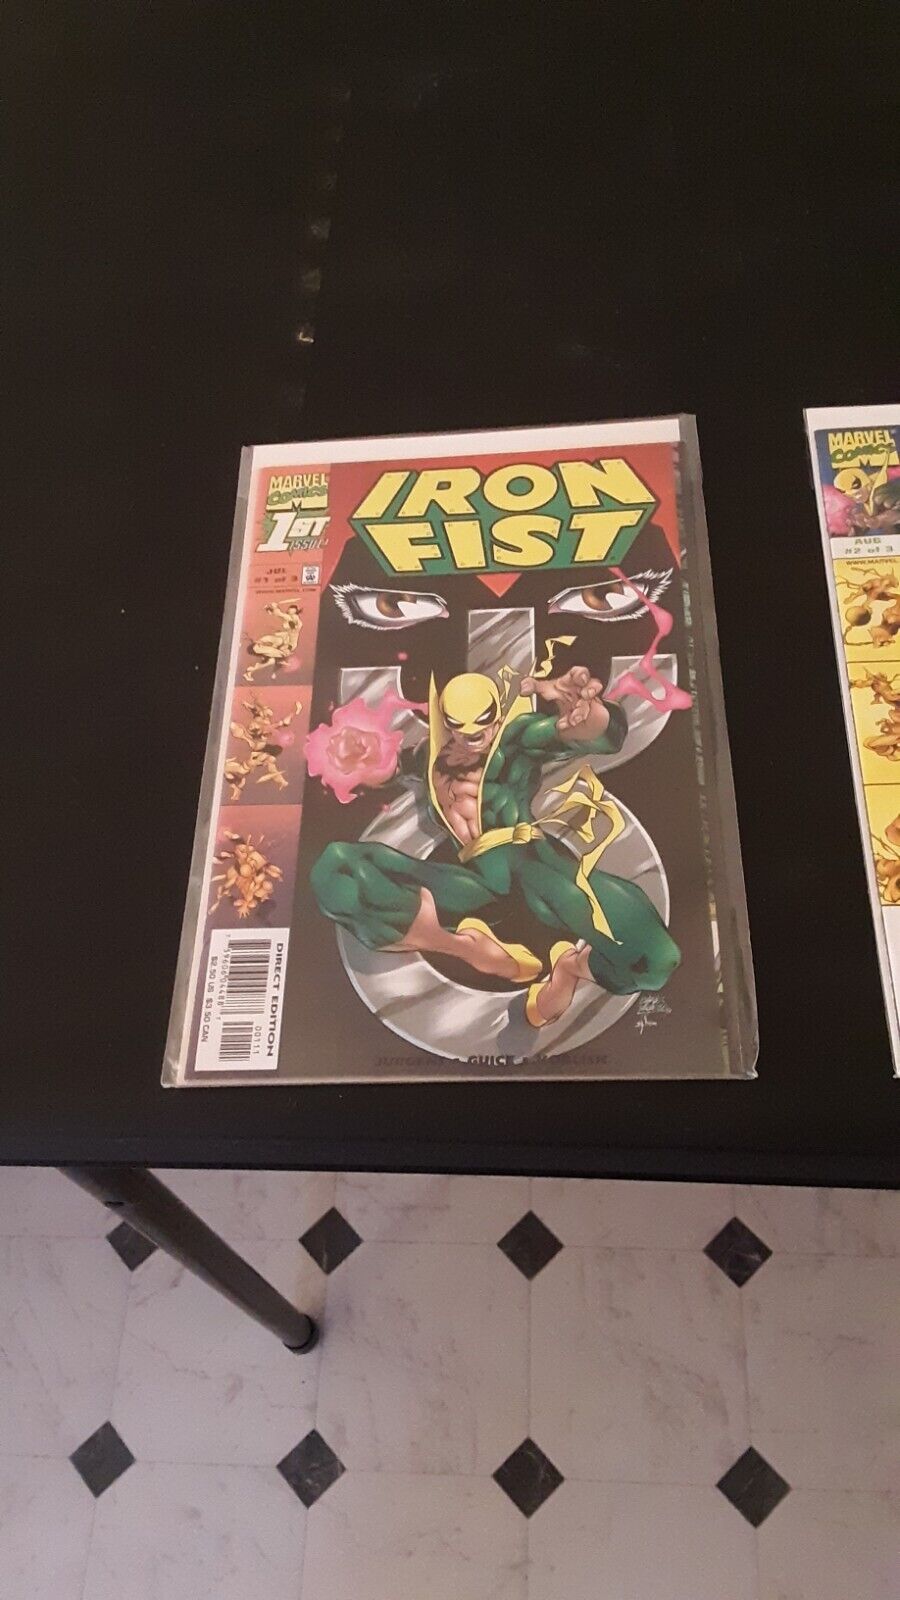 IRON FIST. #1 through #3. Complete Series. PICTURED COPYS.